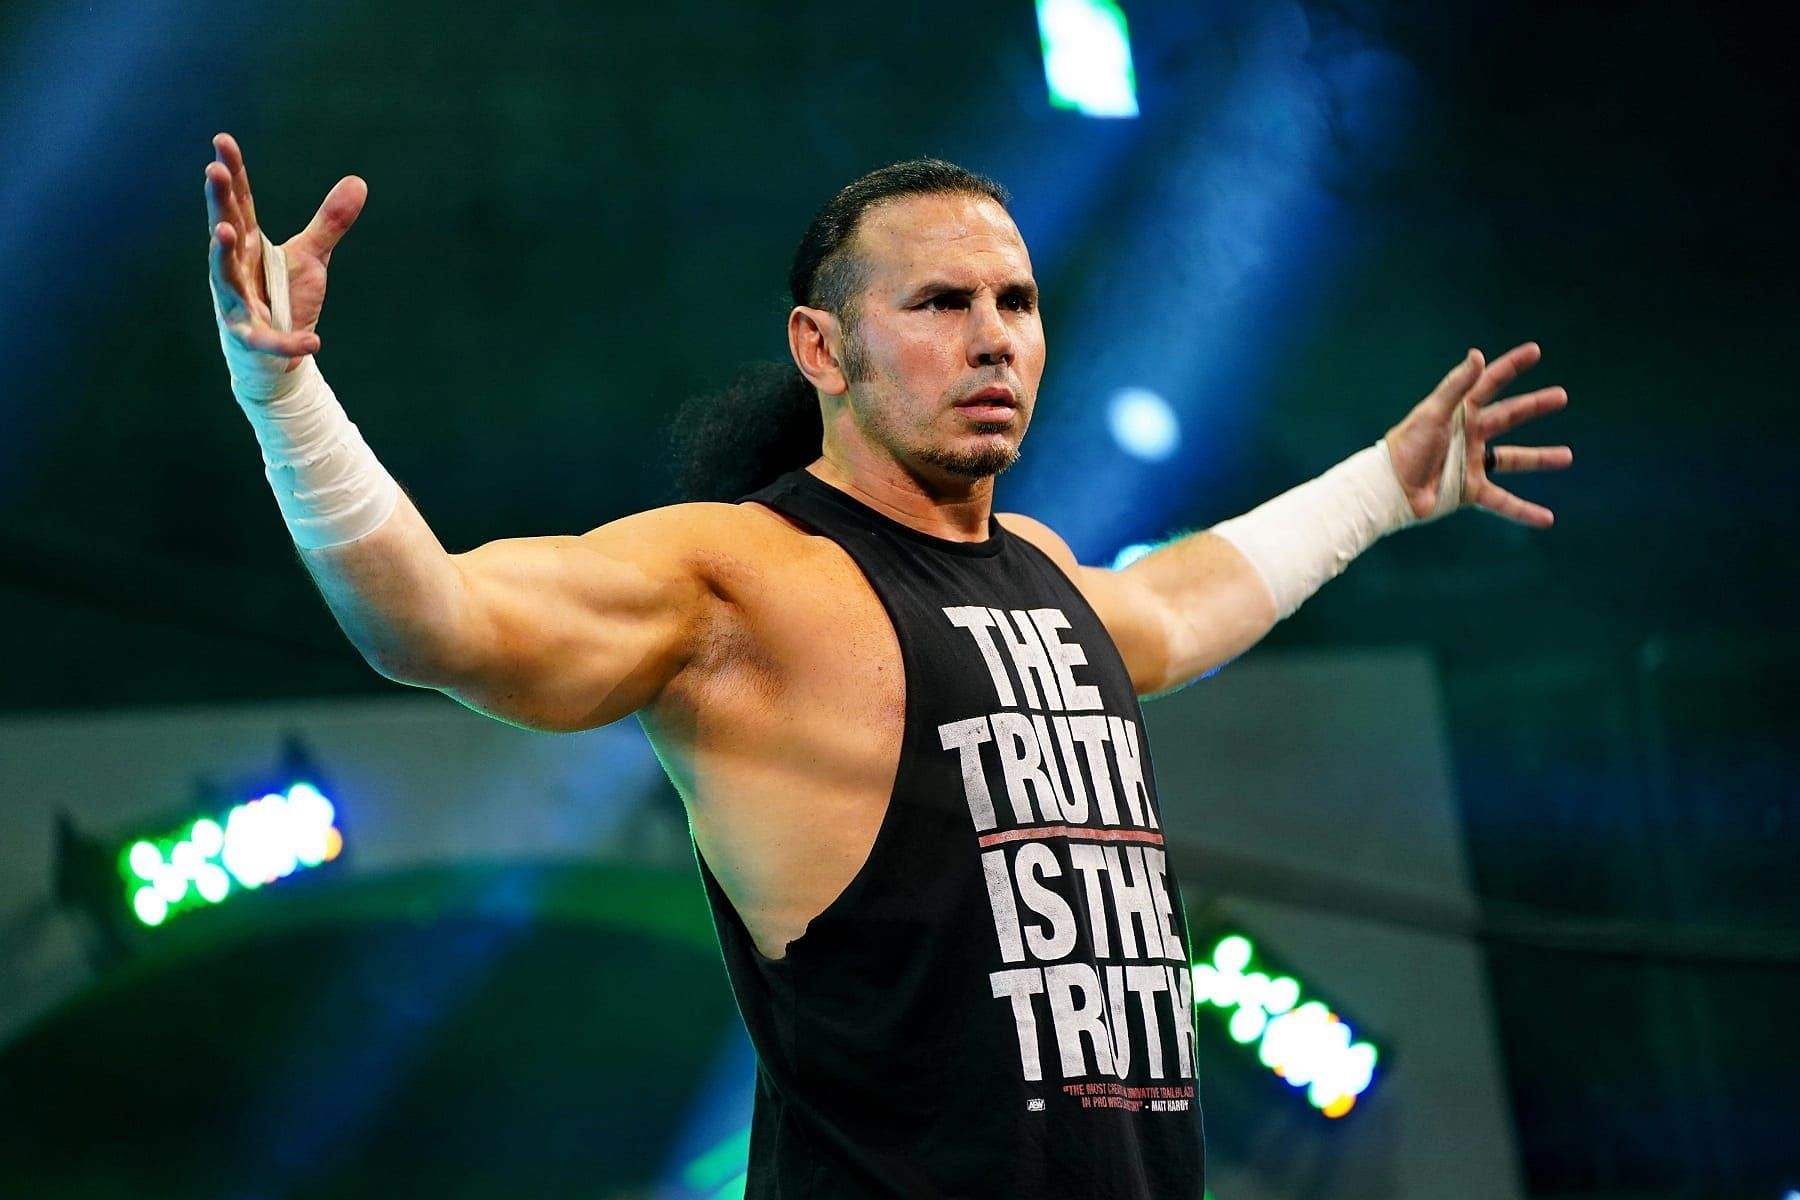 Matt Hardy is still going strong in the wrestling industry 